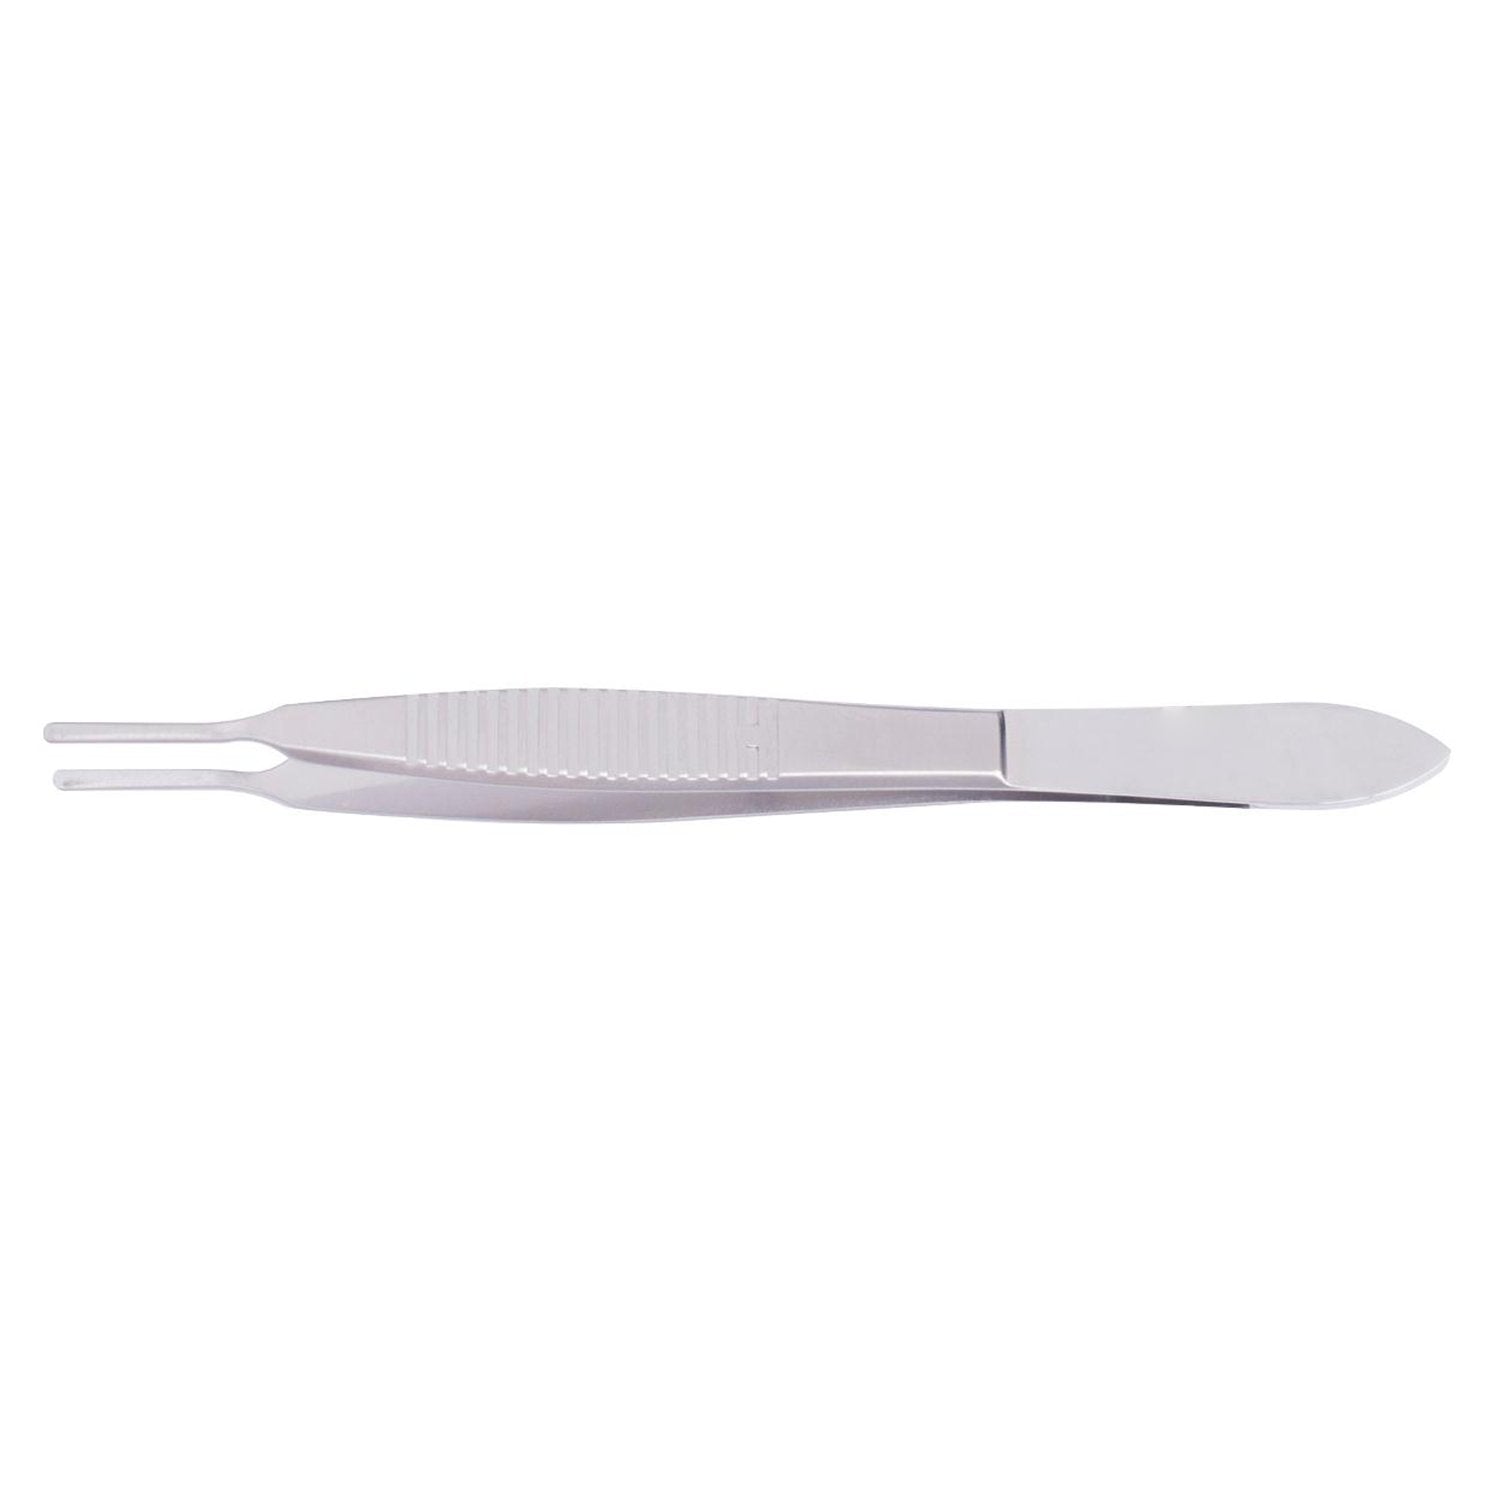 Mccullough Utility Forceps